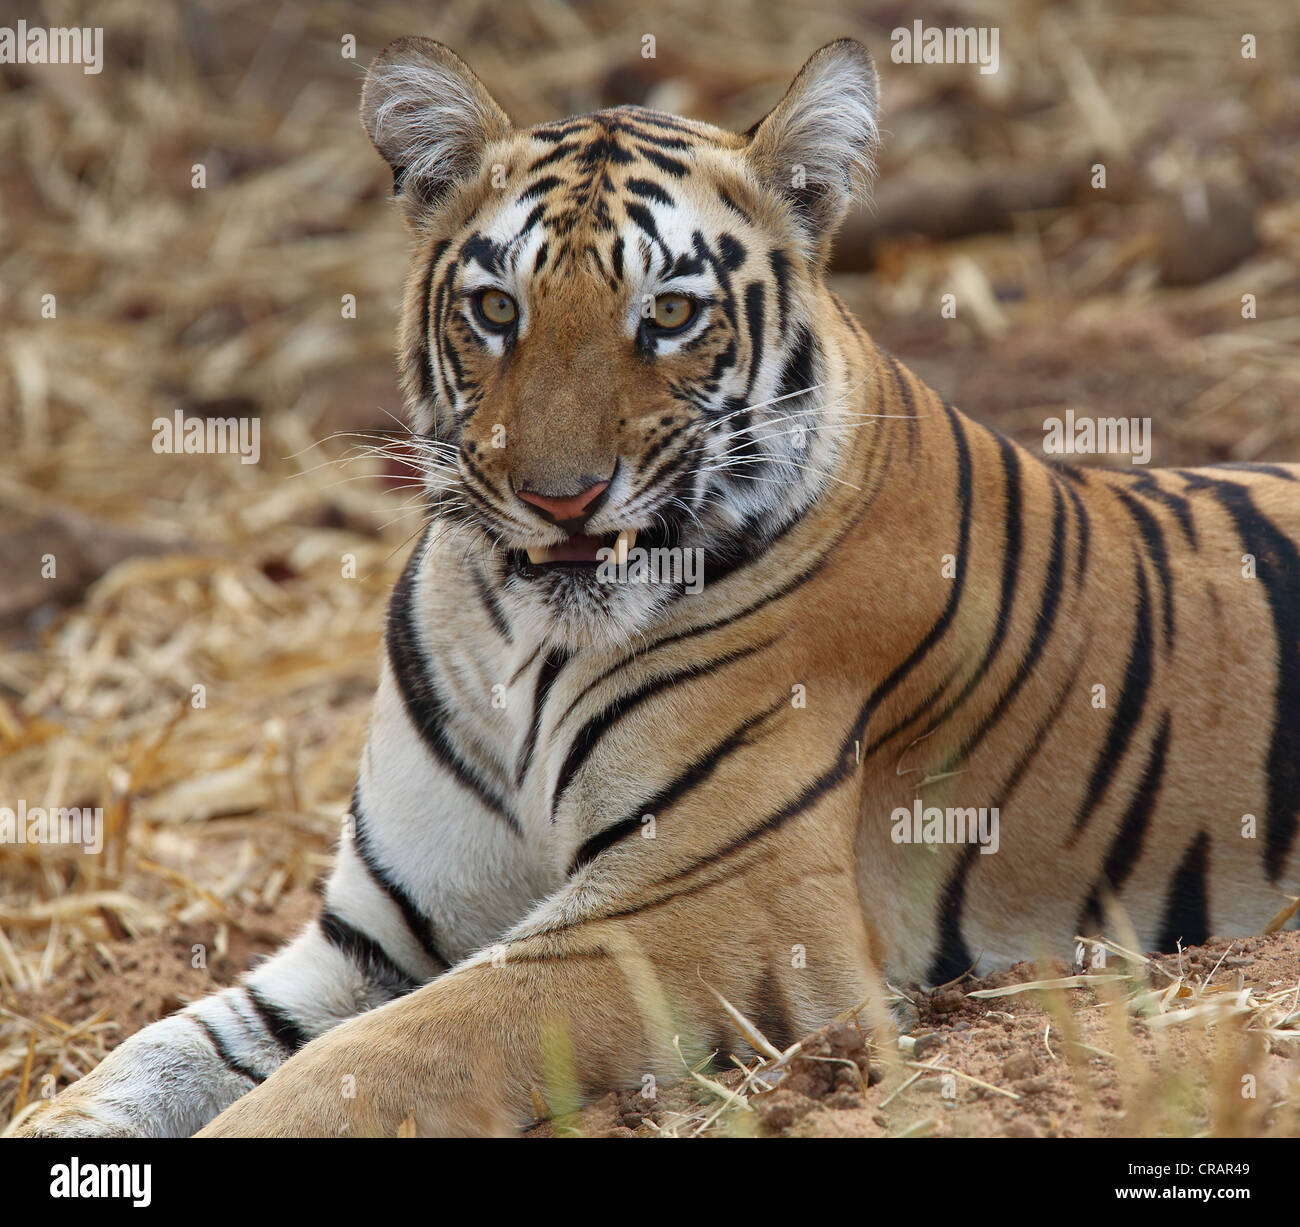 Different moods of a young tiger. Stock Photo